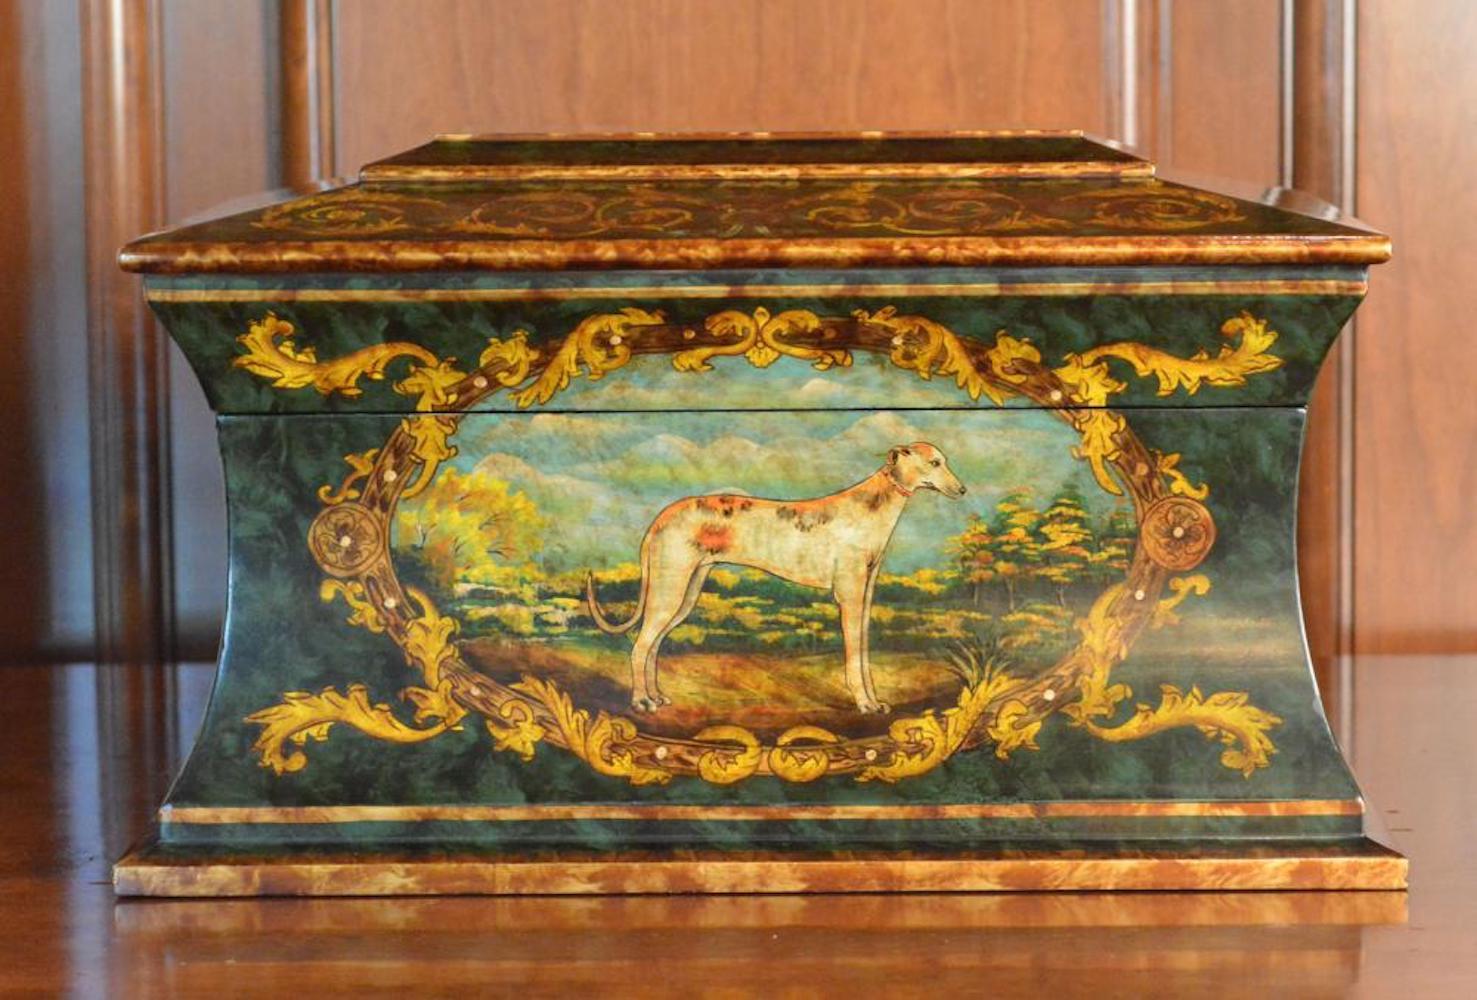 Decorated with mythological animals, a dog, and hare. Gilt decorations. Measure: 20